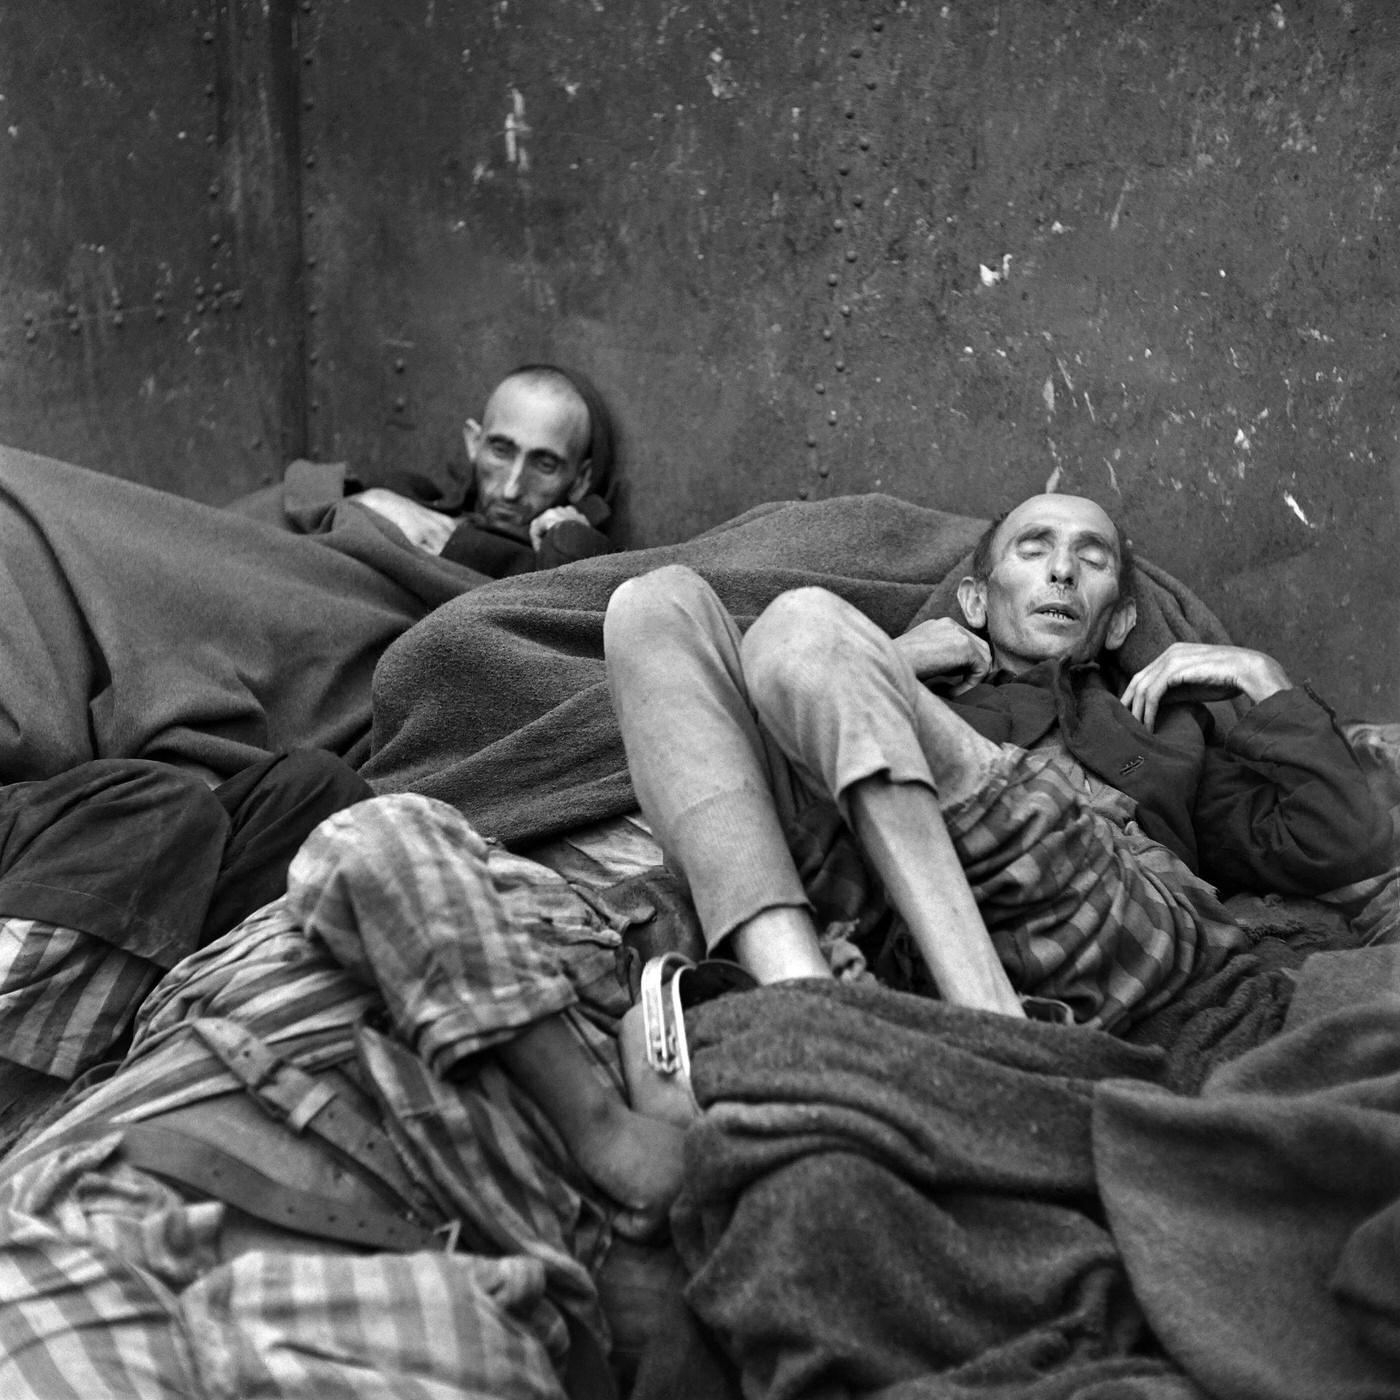 Prisoner's dead bodies stacked in a train near Dachau concentration camp after its liberation by the US Army in late April or early May 1945.